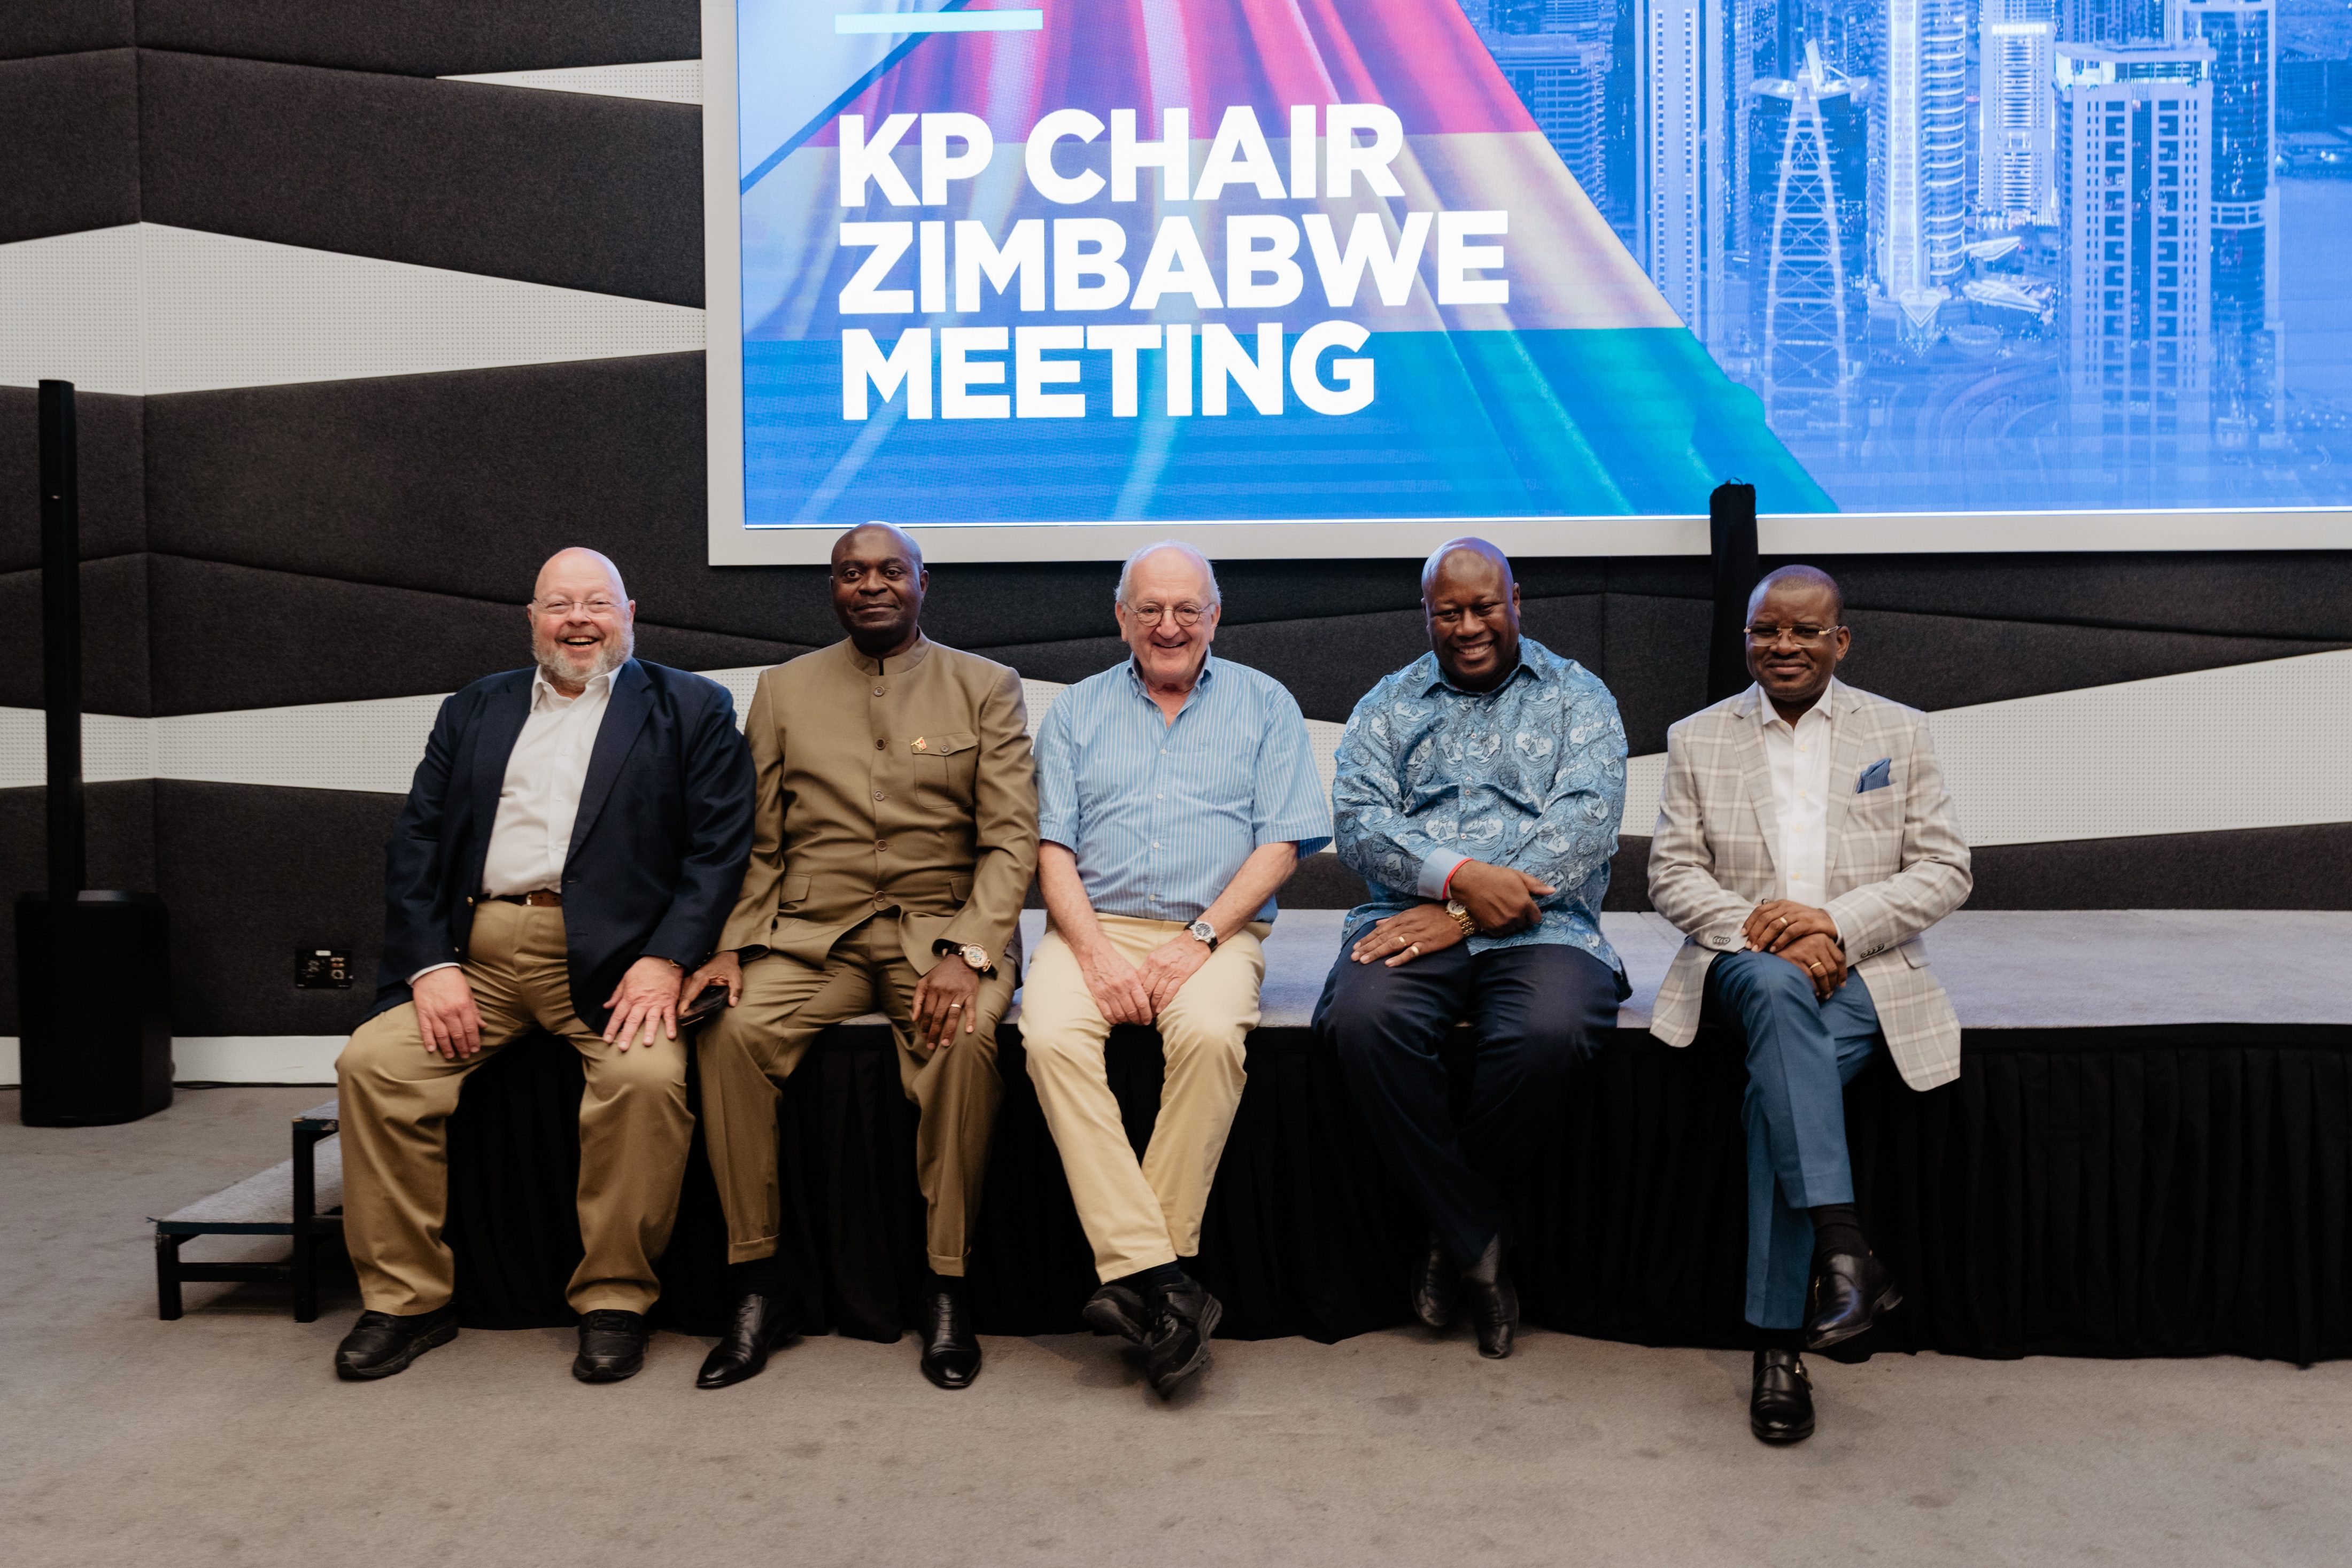 Kimberley Process Chairs Strategic Meeting, 12-13 January 2023

In preparation for the KP Chairmanship of the Repbulci of Zimbabwe, the 2023 KP Chair, H.E. Winston Chitando invited the KP Vice Chair, KP Working Group Chairs and the representatives of the KP Observers in order to plan the new KP year.